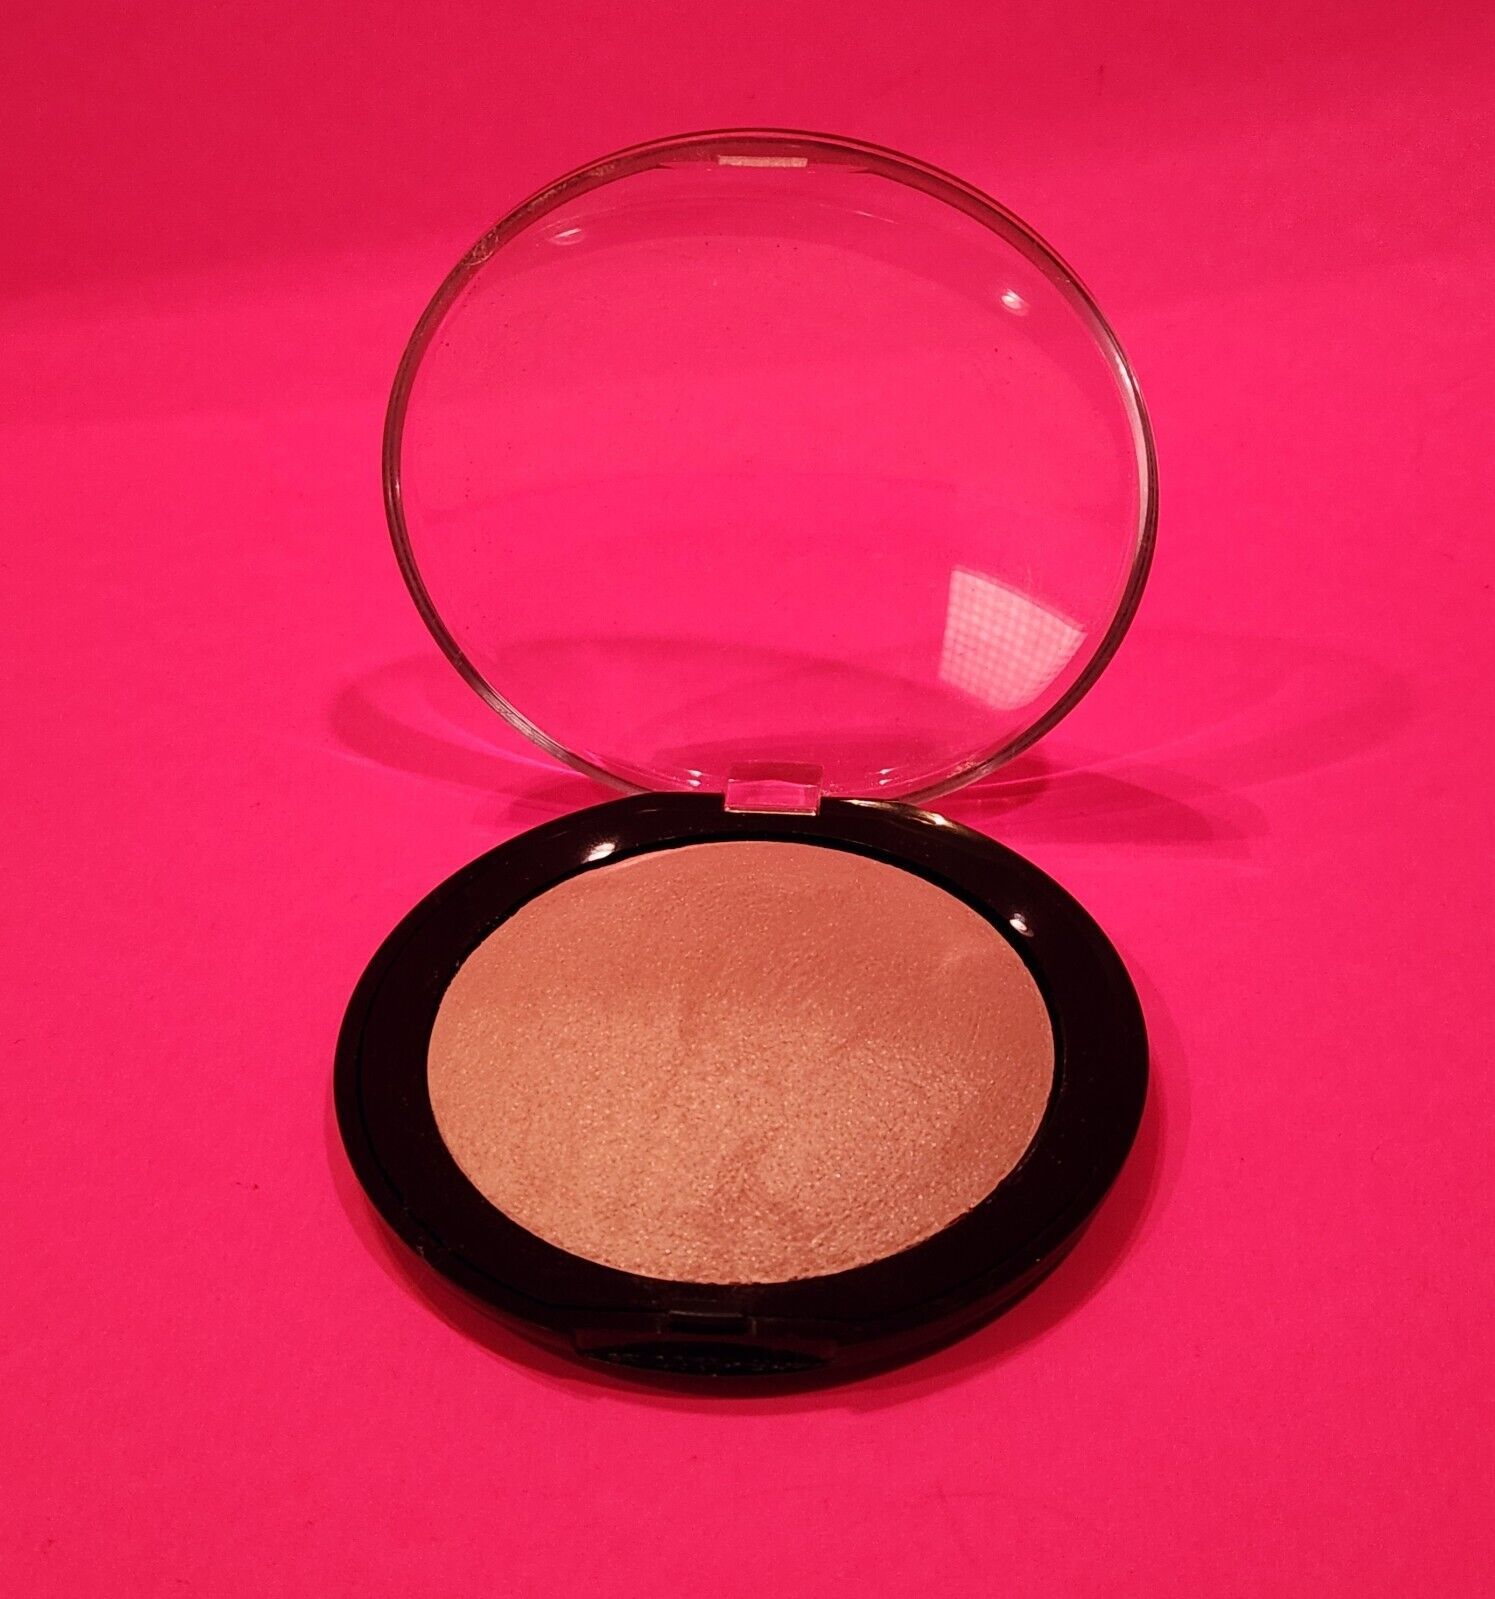 Primary image for Laura Mercier Matte Radiance Baked Powder: Highlight 01, .26oz Unboxed